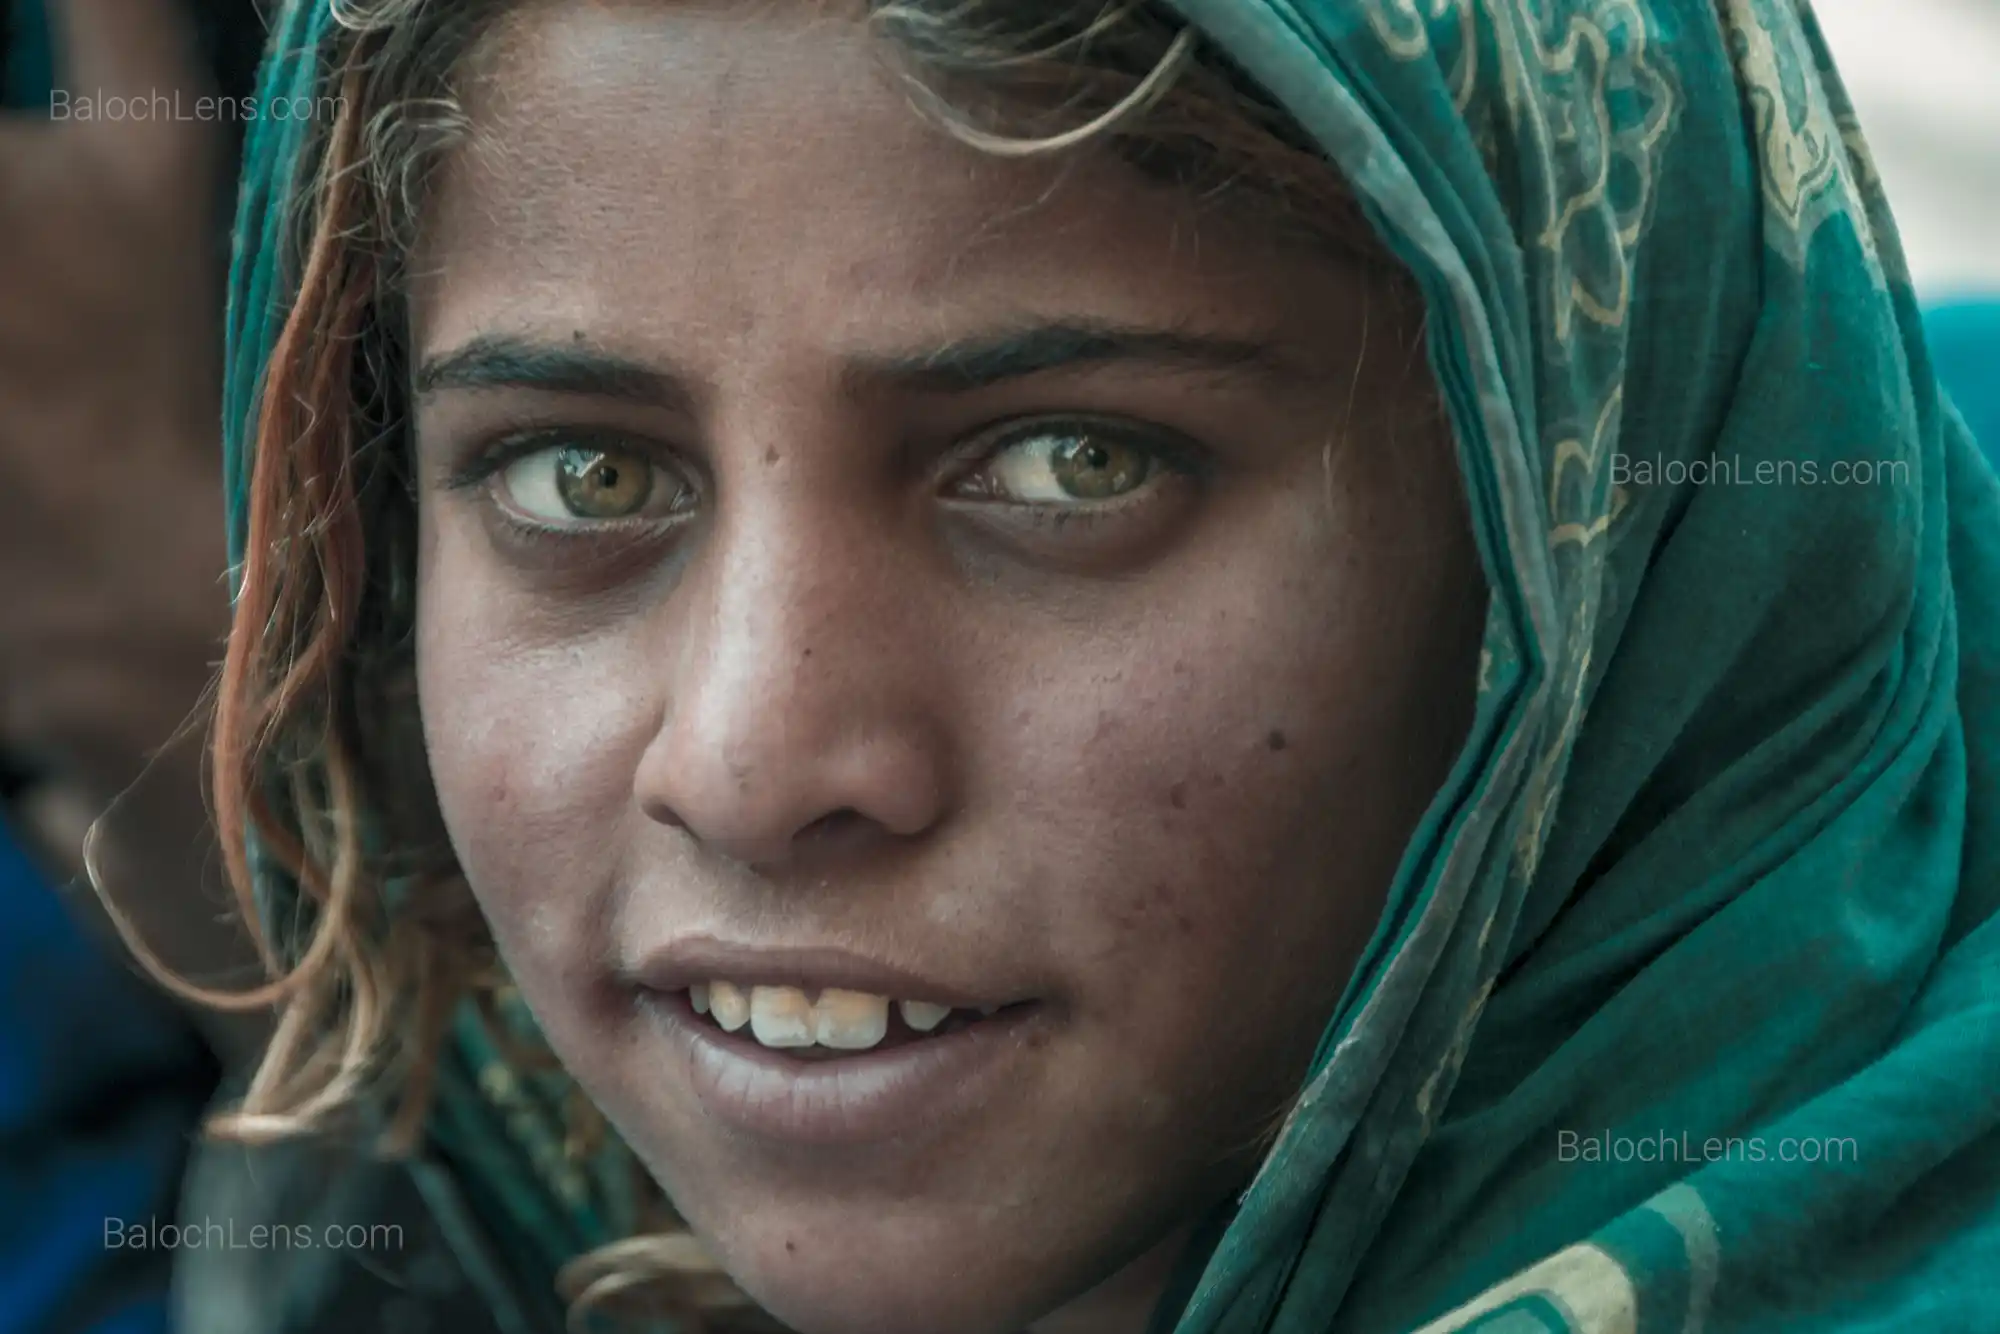 Baloch Psycho girl with beautiful Eyes, she is badly treated by her Cold-Blooded Brothers